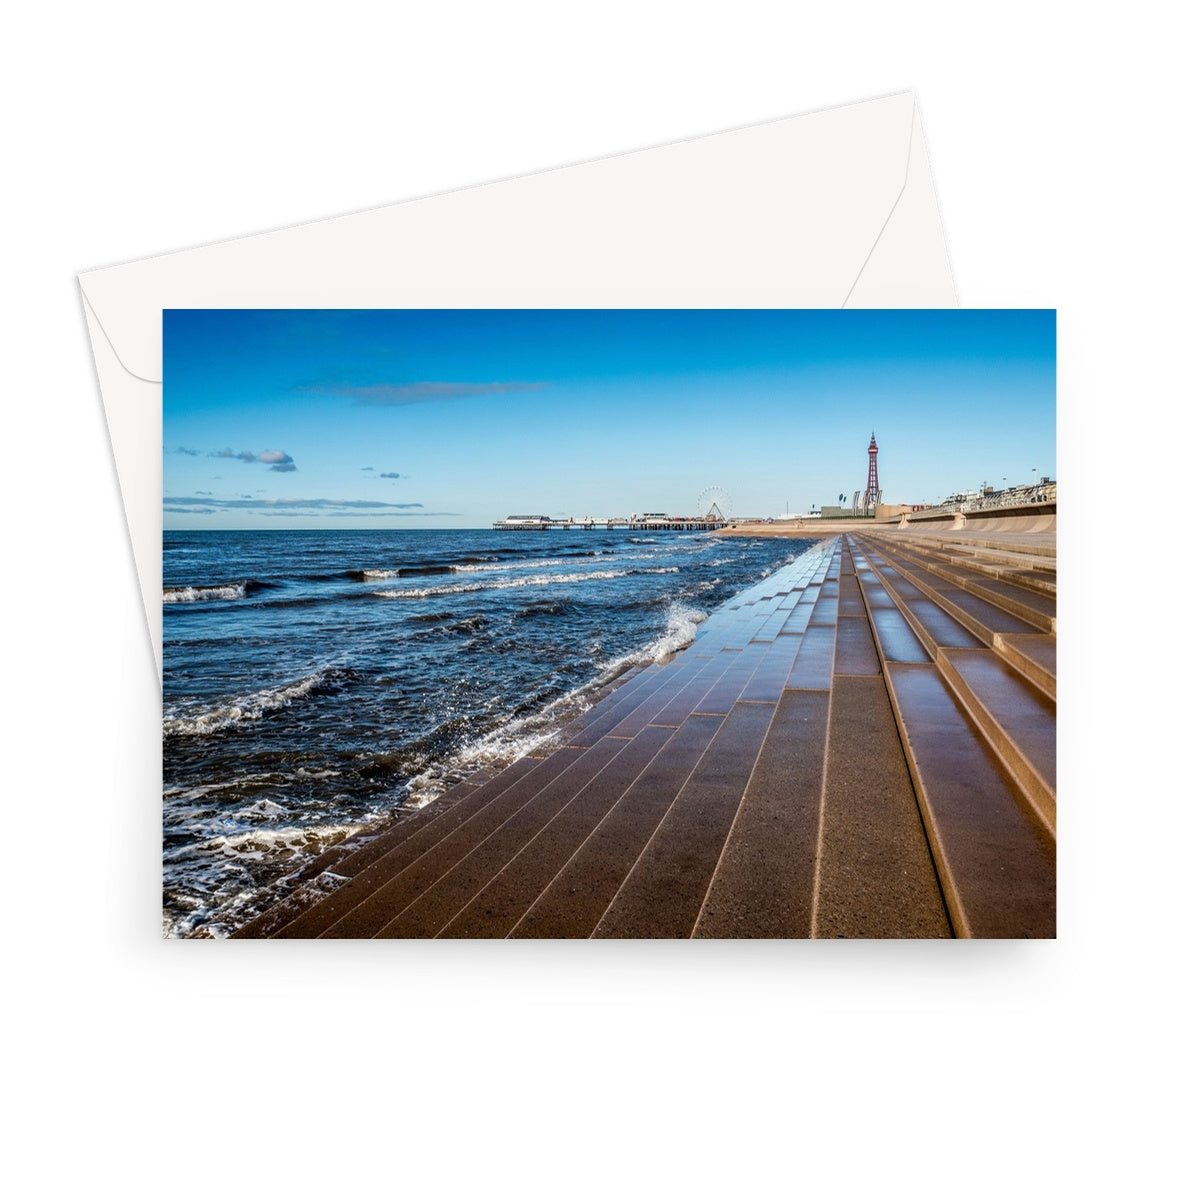 Blackpool's stone stepped sea defences with Blackpool Tower and Central Pier in the distance, Blackpool, UK. Greeting Card